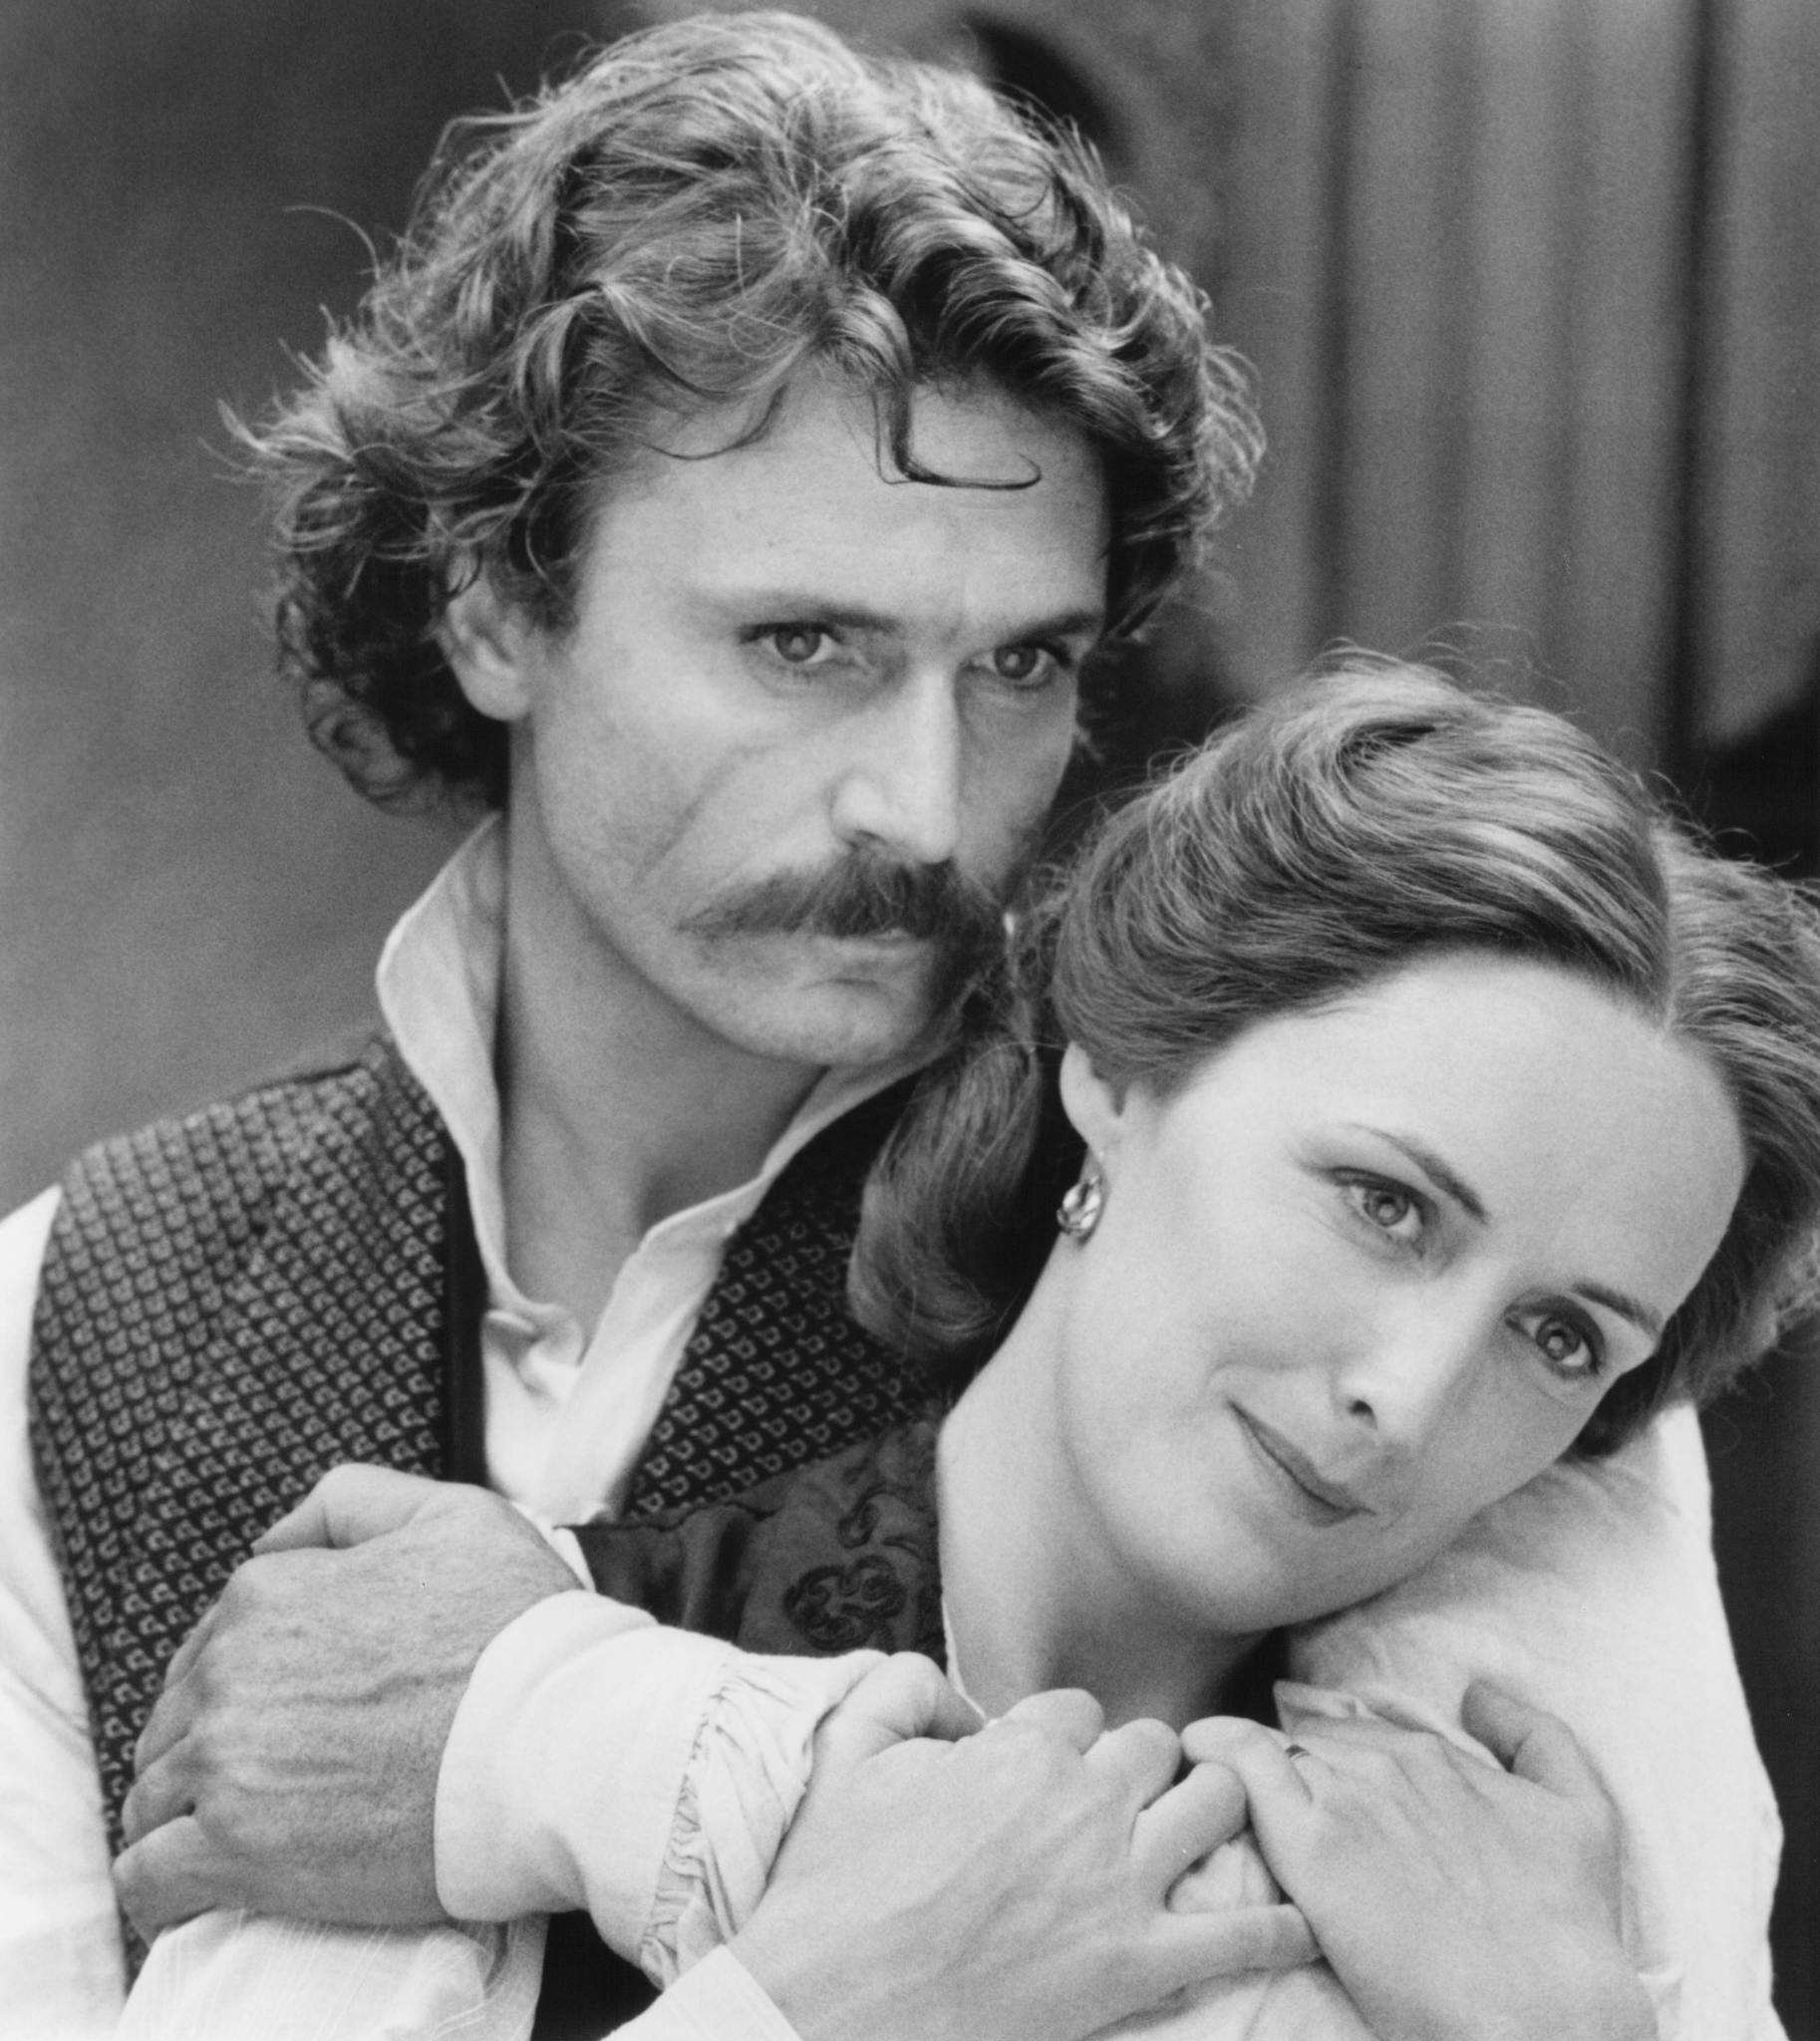 Still of Patrick Bergin and Fiona Shaw in Mountains of the Moon (1990)